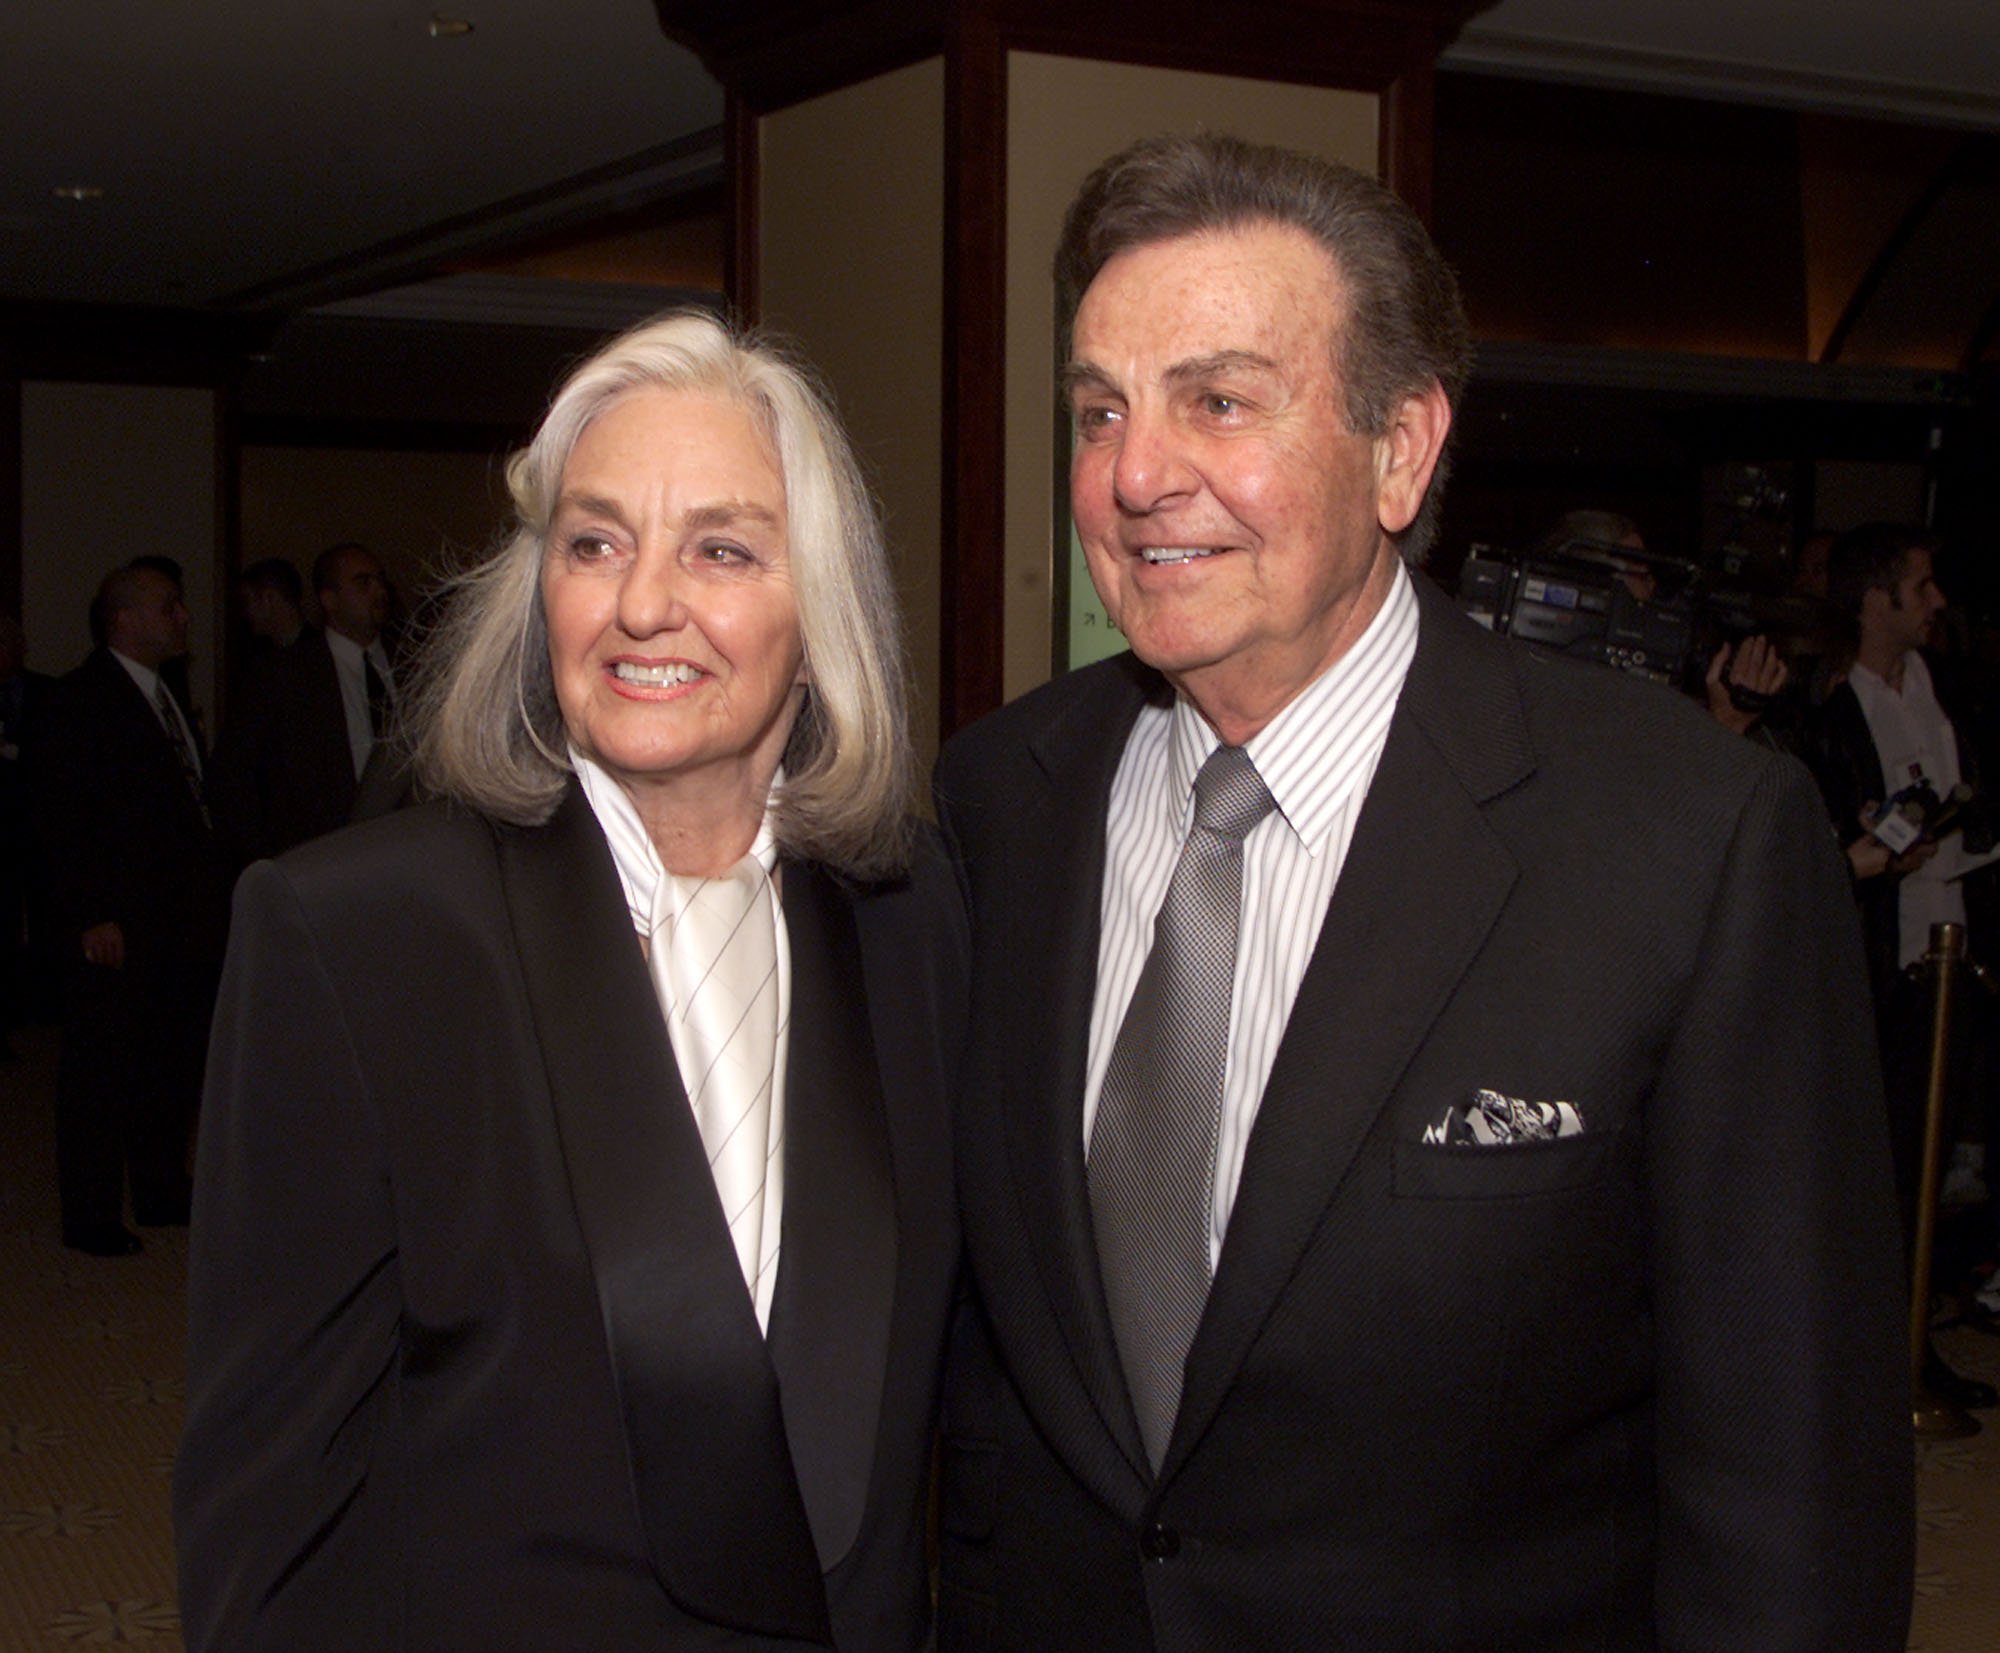 Mike Connors and Mary Lou Connors at 'ROAST THIS! An Evening with Muhammad Ali and Friends' at the Century Plaza Hotel in Los Angeles, on November 16 2000 | Source: Getty Images